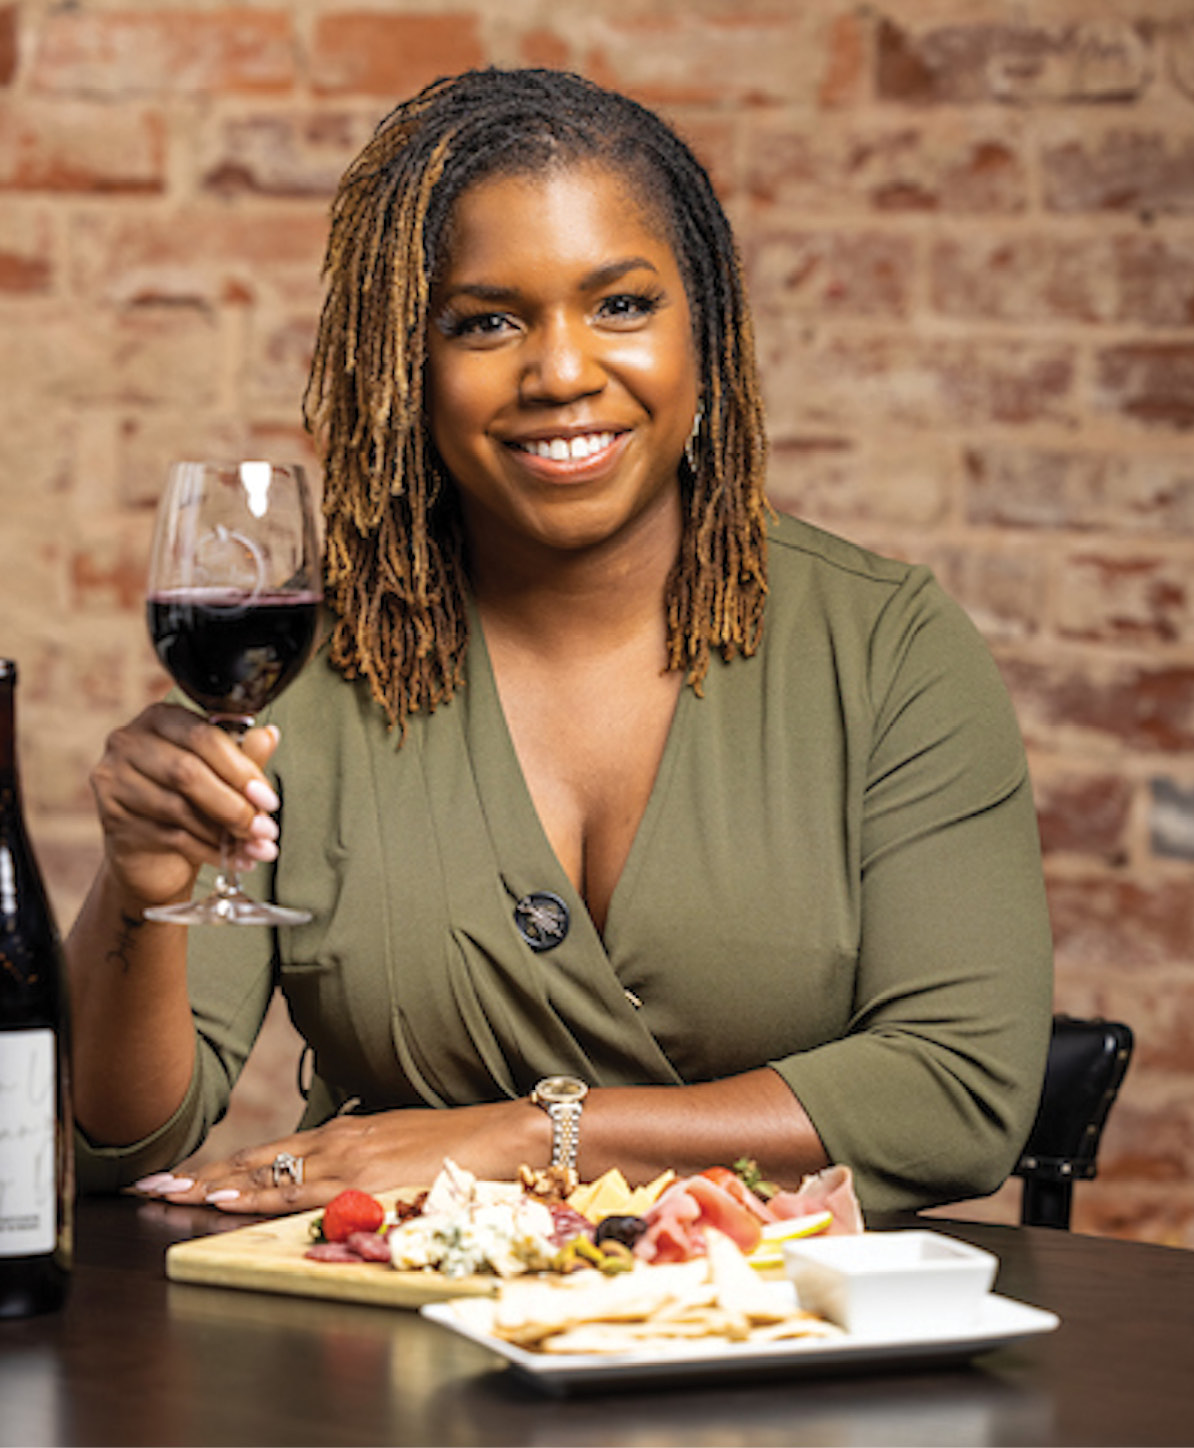 A former attorney, Lindsey Williams opened Davidson Wine Company in Charlotte in 2019, and Charleston Wine Company, located on Market Street, in 2021.